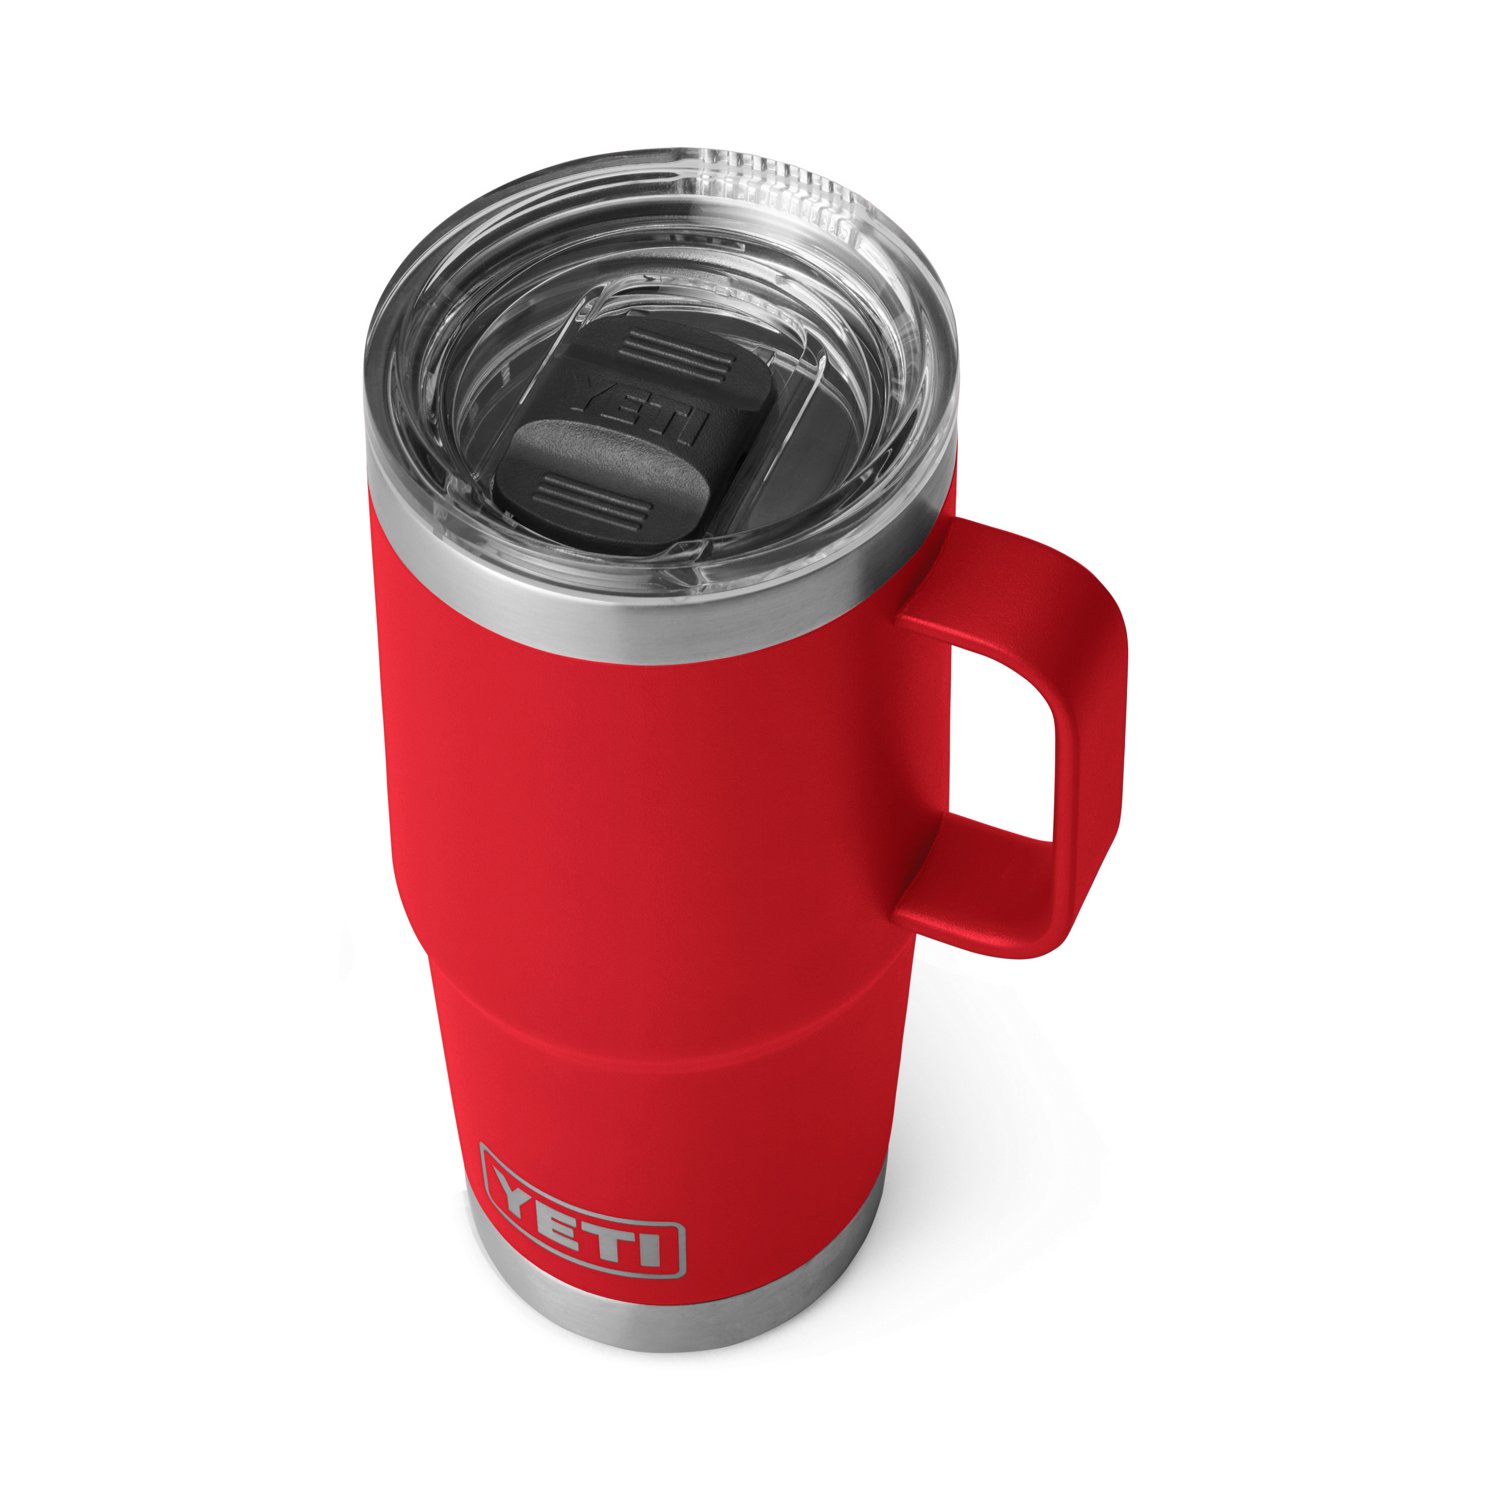 https://academy.scene7.com/is/image/academy//drinkware/yeti-rambler-20-oz-travel-mug-with-stronghold-lid-21071501392-red/00c4a8c46161461ea4a374a22a6a66c4